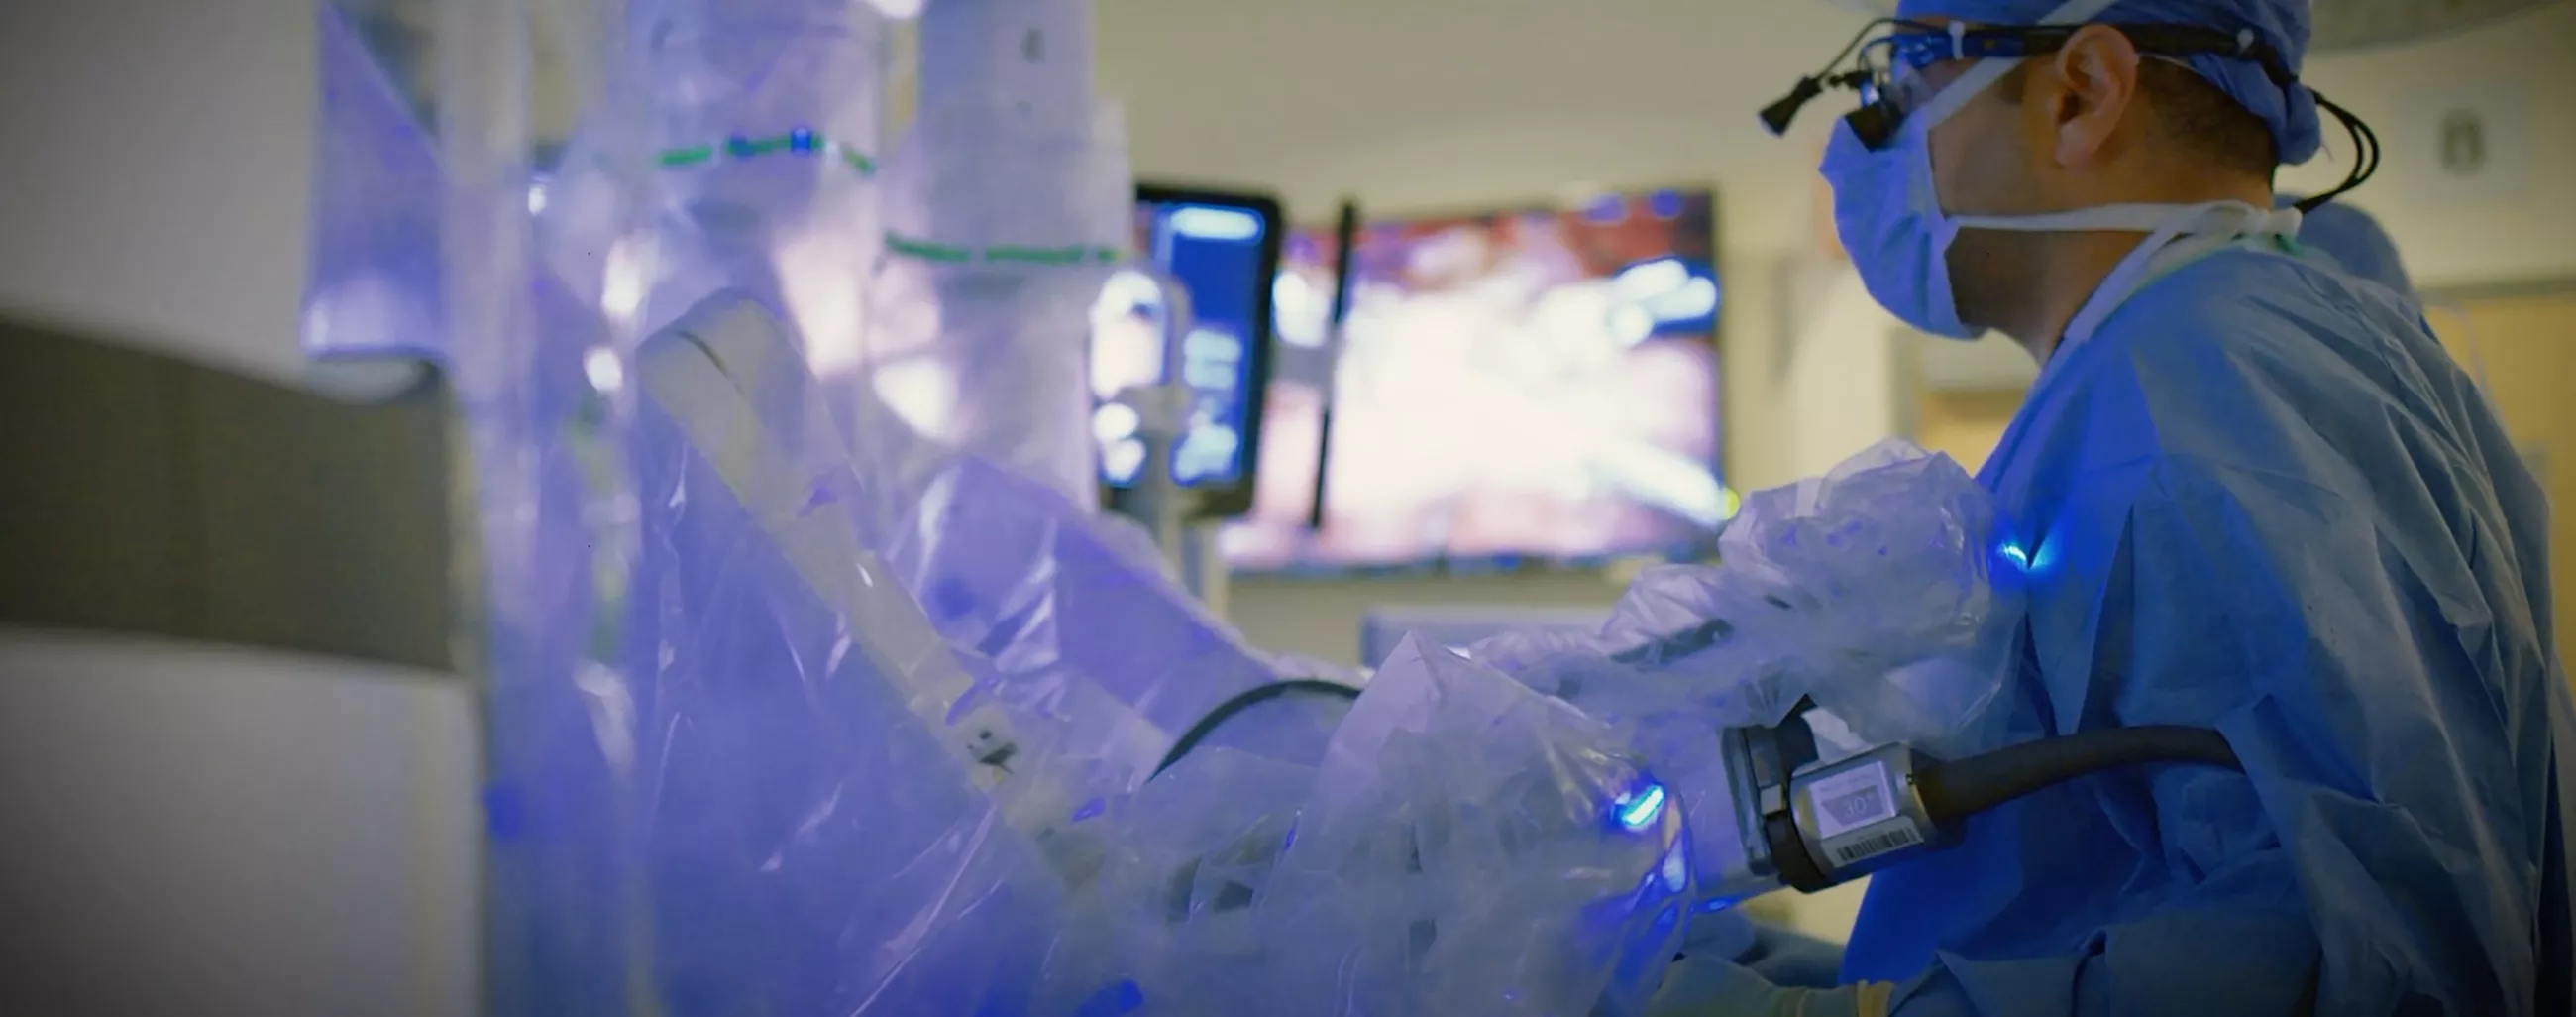 Robotically Assisted, Minimally Invasive Whipple Surgery at UCSF